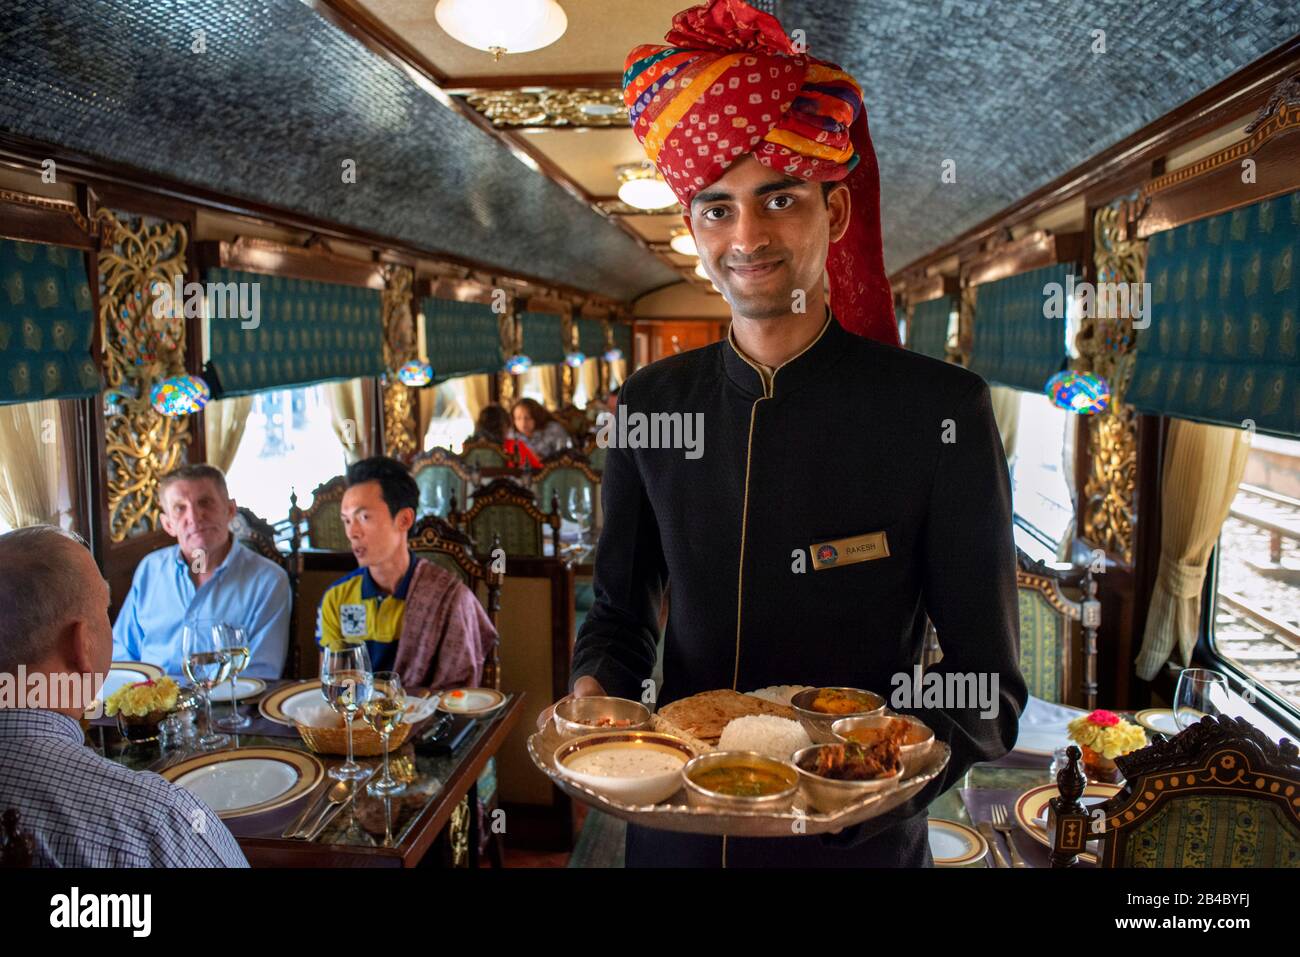 Indian food served inside one of the dining cars of the Luxury train Maharajas express train. Jodhpur Rajasthan India. Stock Photo